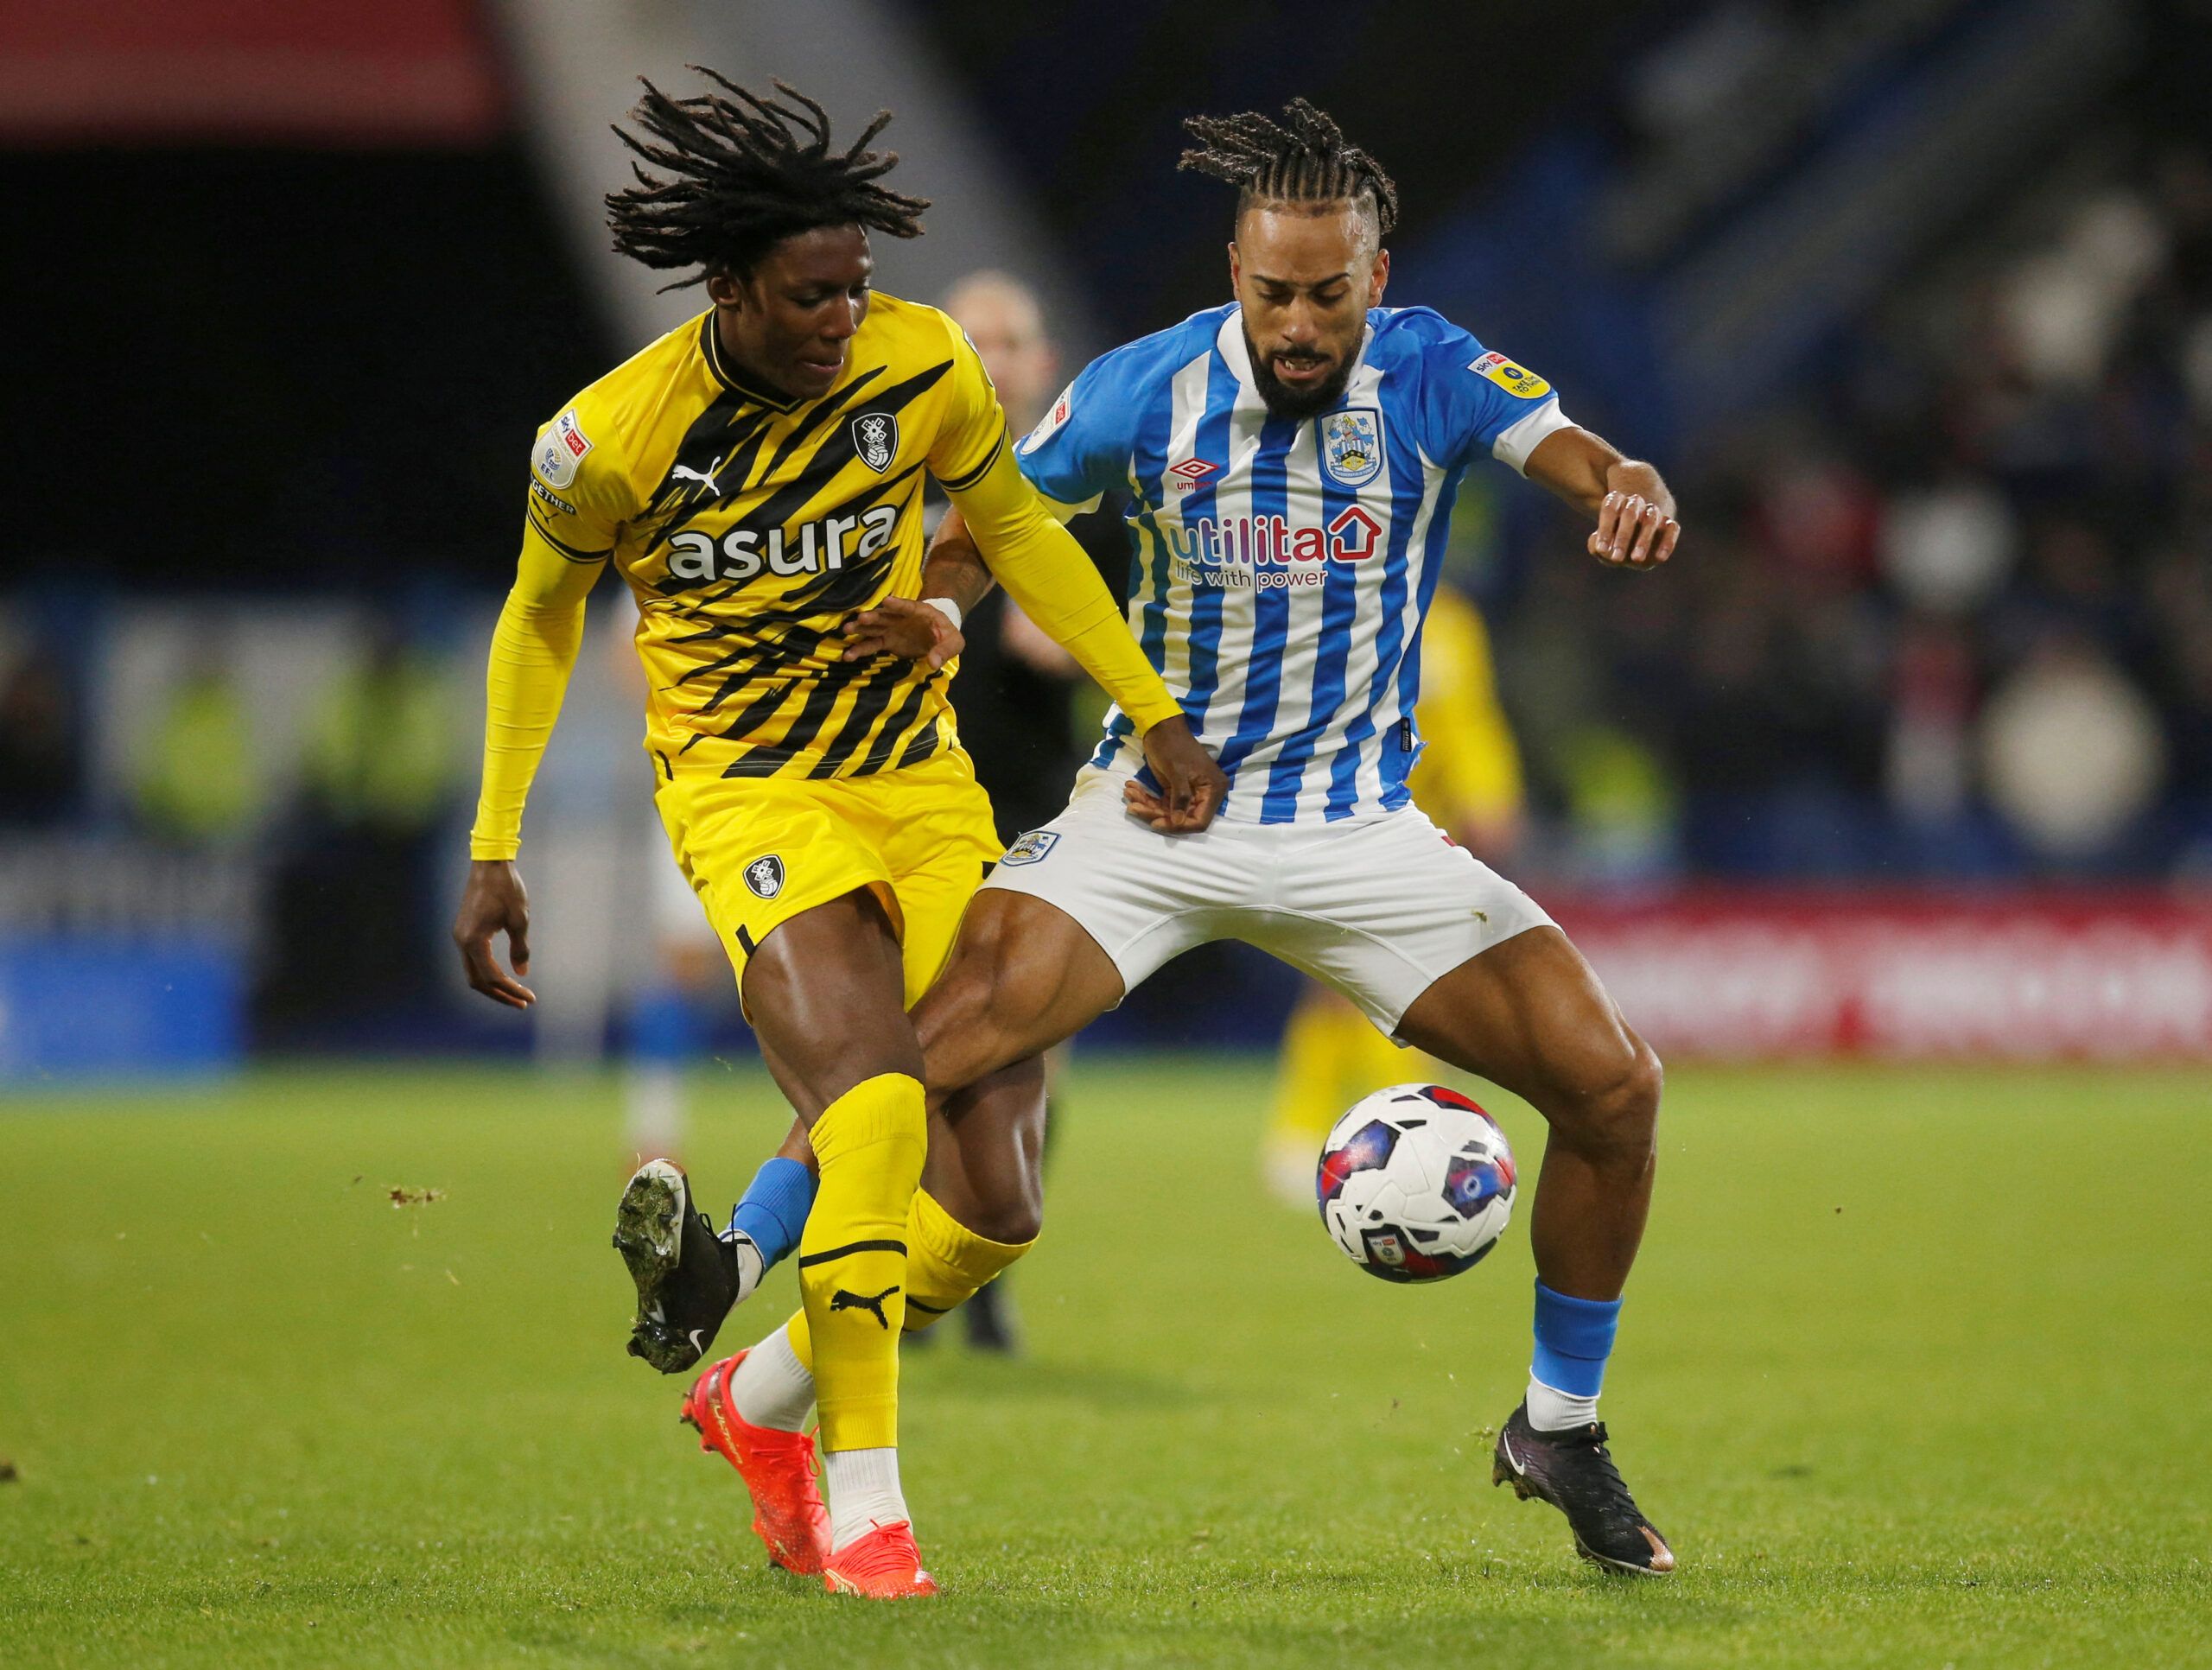 Soccer Football - Championship -  Huddersfield Town v Rotherham United - John Smith's Stadium, Huddersfield, Britain - December 29, 2022  Rotherham United's Brooke Norton-Cuffy in actionwith Huddersfield Town's Sorba Thomas Action Images/Ed Sykes  EDITORIAL USE ONLY. No use with unauthorized audio, video, data, fixture lists, club/league logos or 